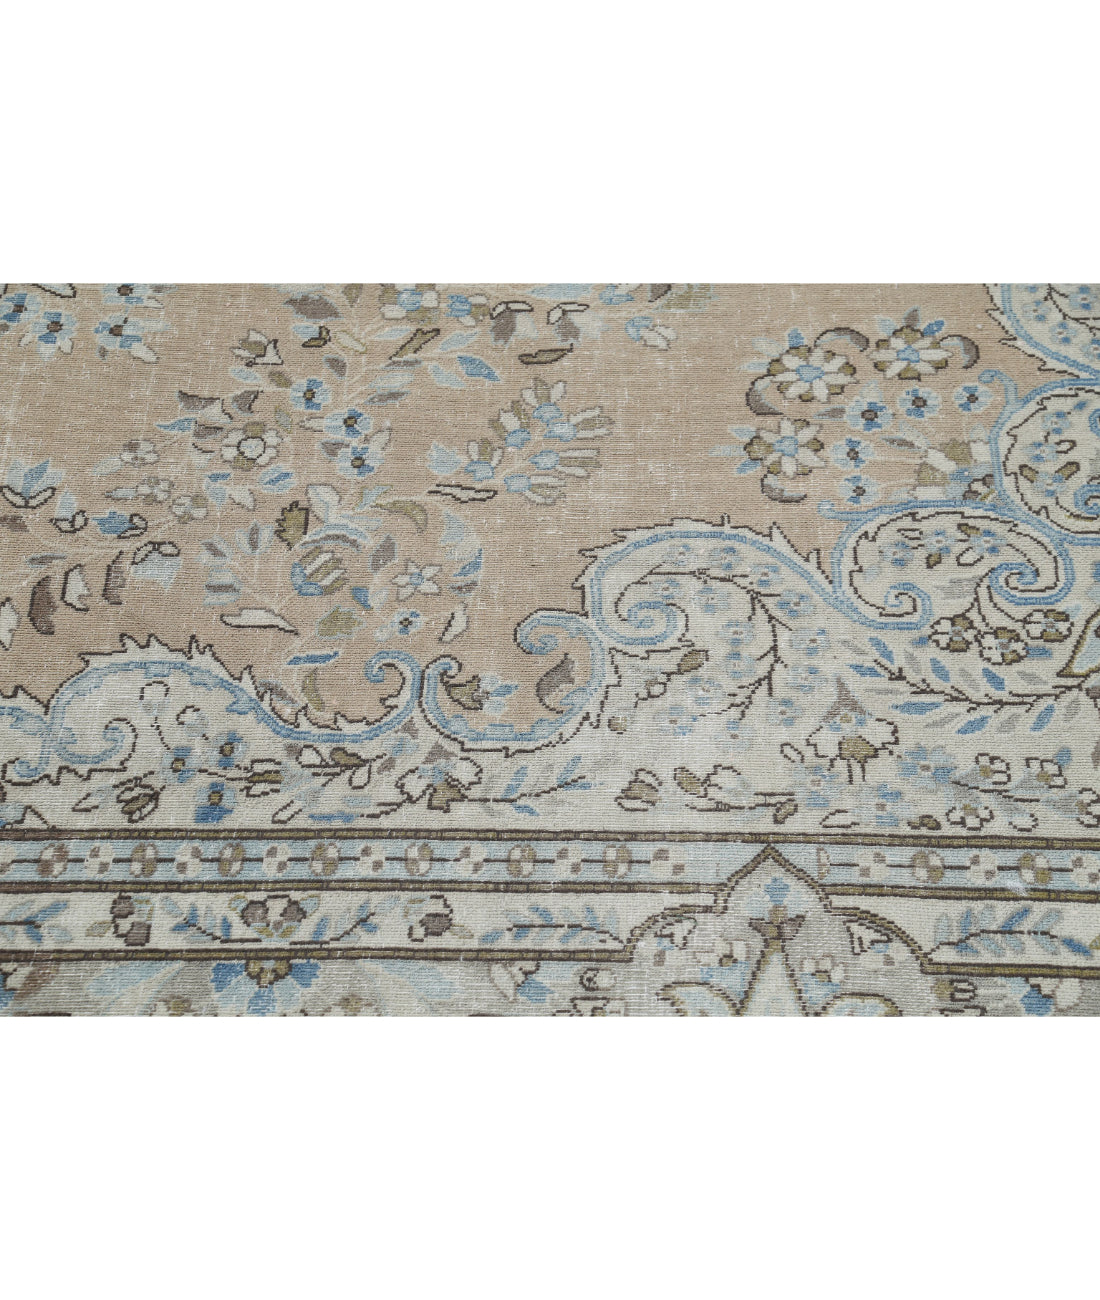 Hand Knotted Vintage Persian Kerman Wool Rug - 8'2'' x 11'7'' 8'2'' x 11'7'' (245 X 348) / Taupe / Grey